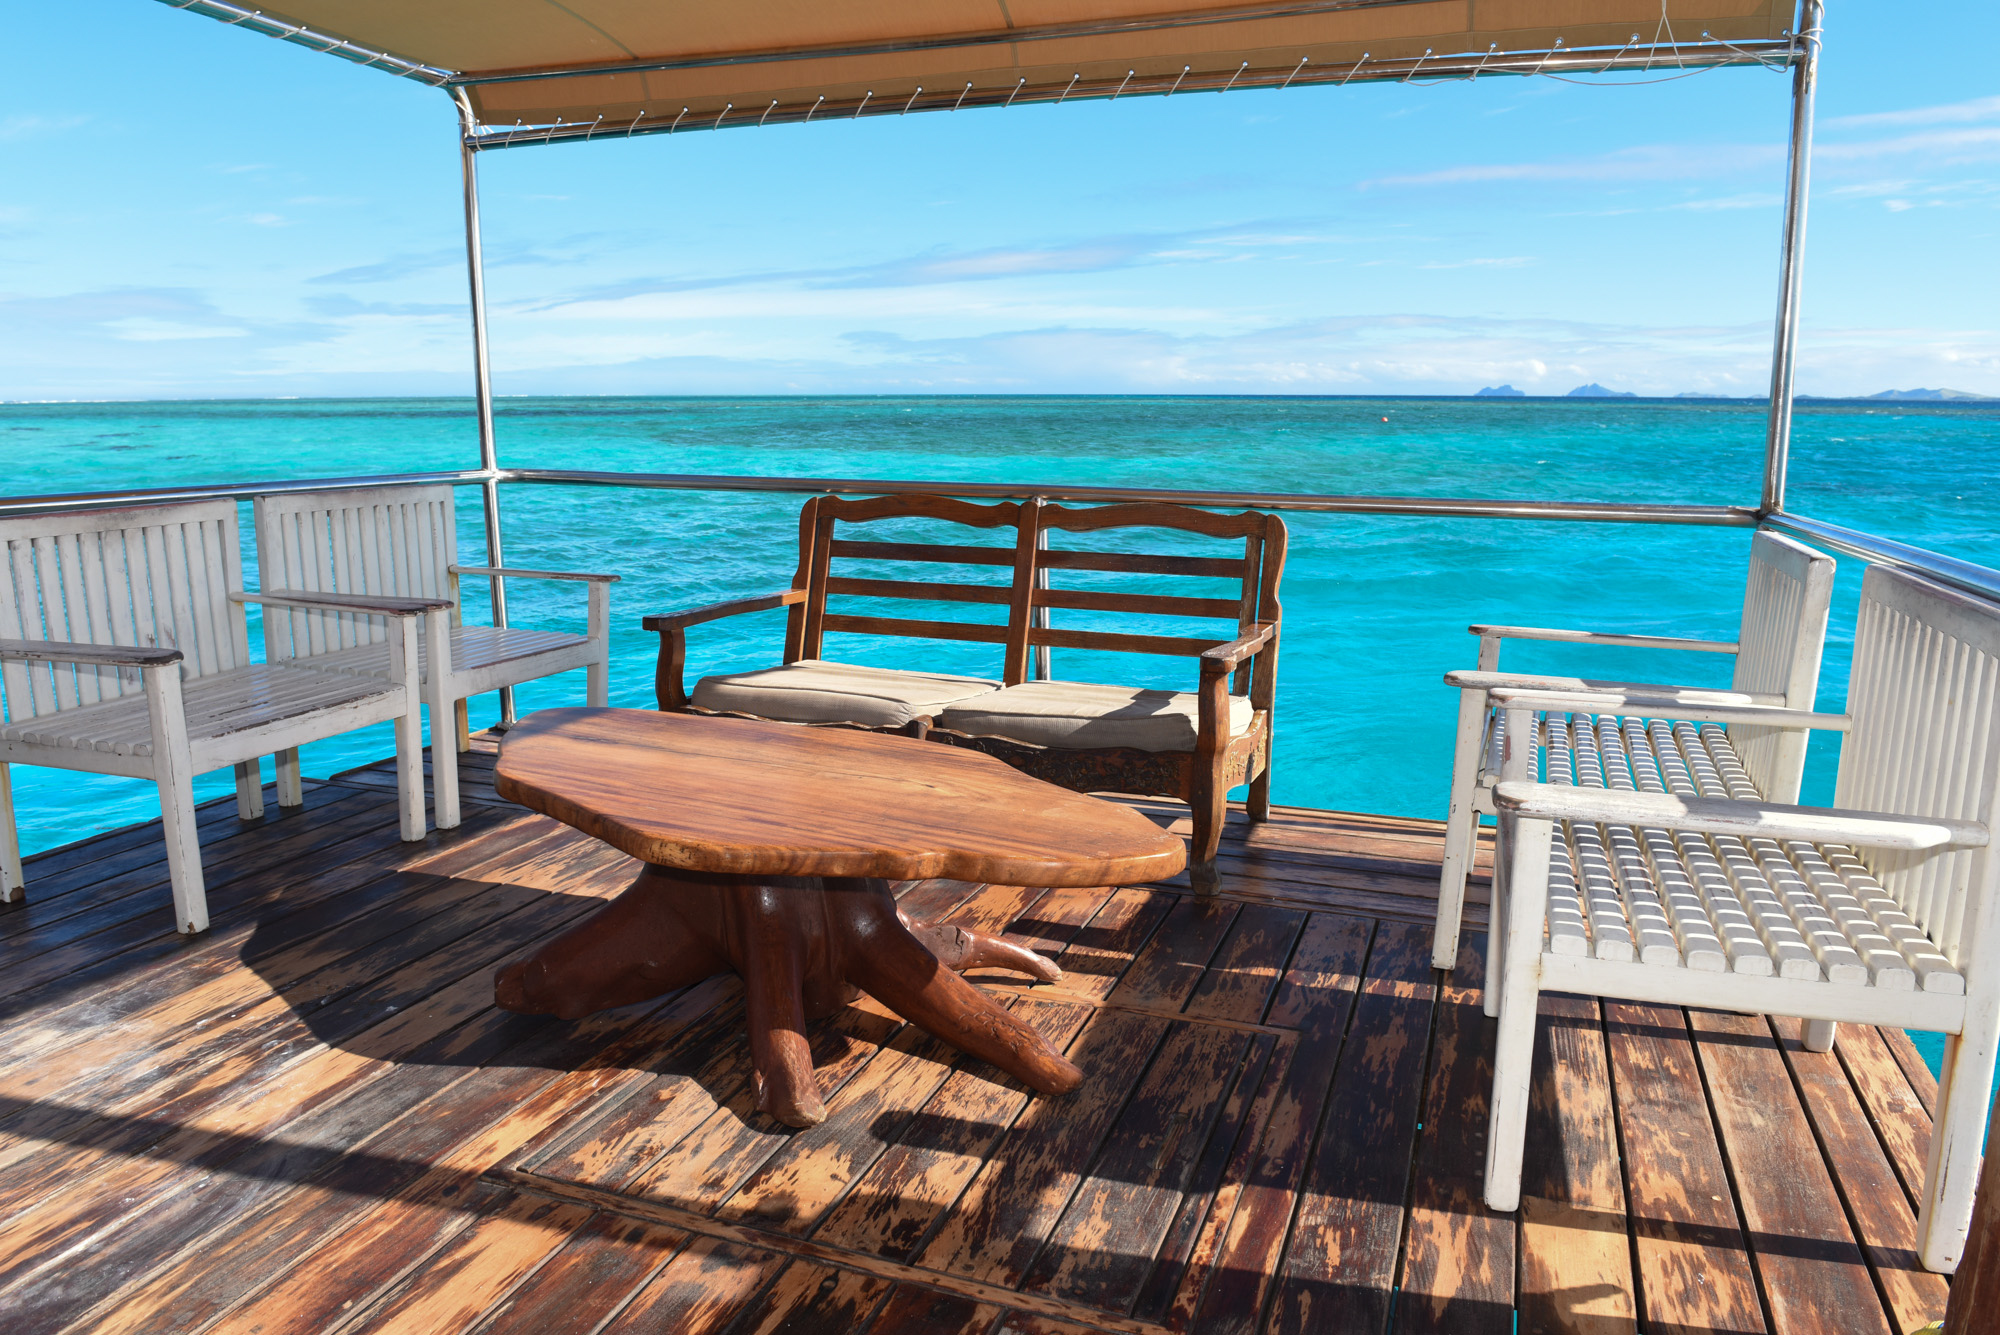 Fiji Beautiful living room on a boat with impressive turquoise sea in the background